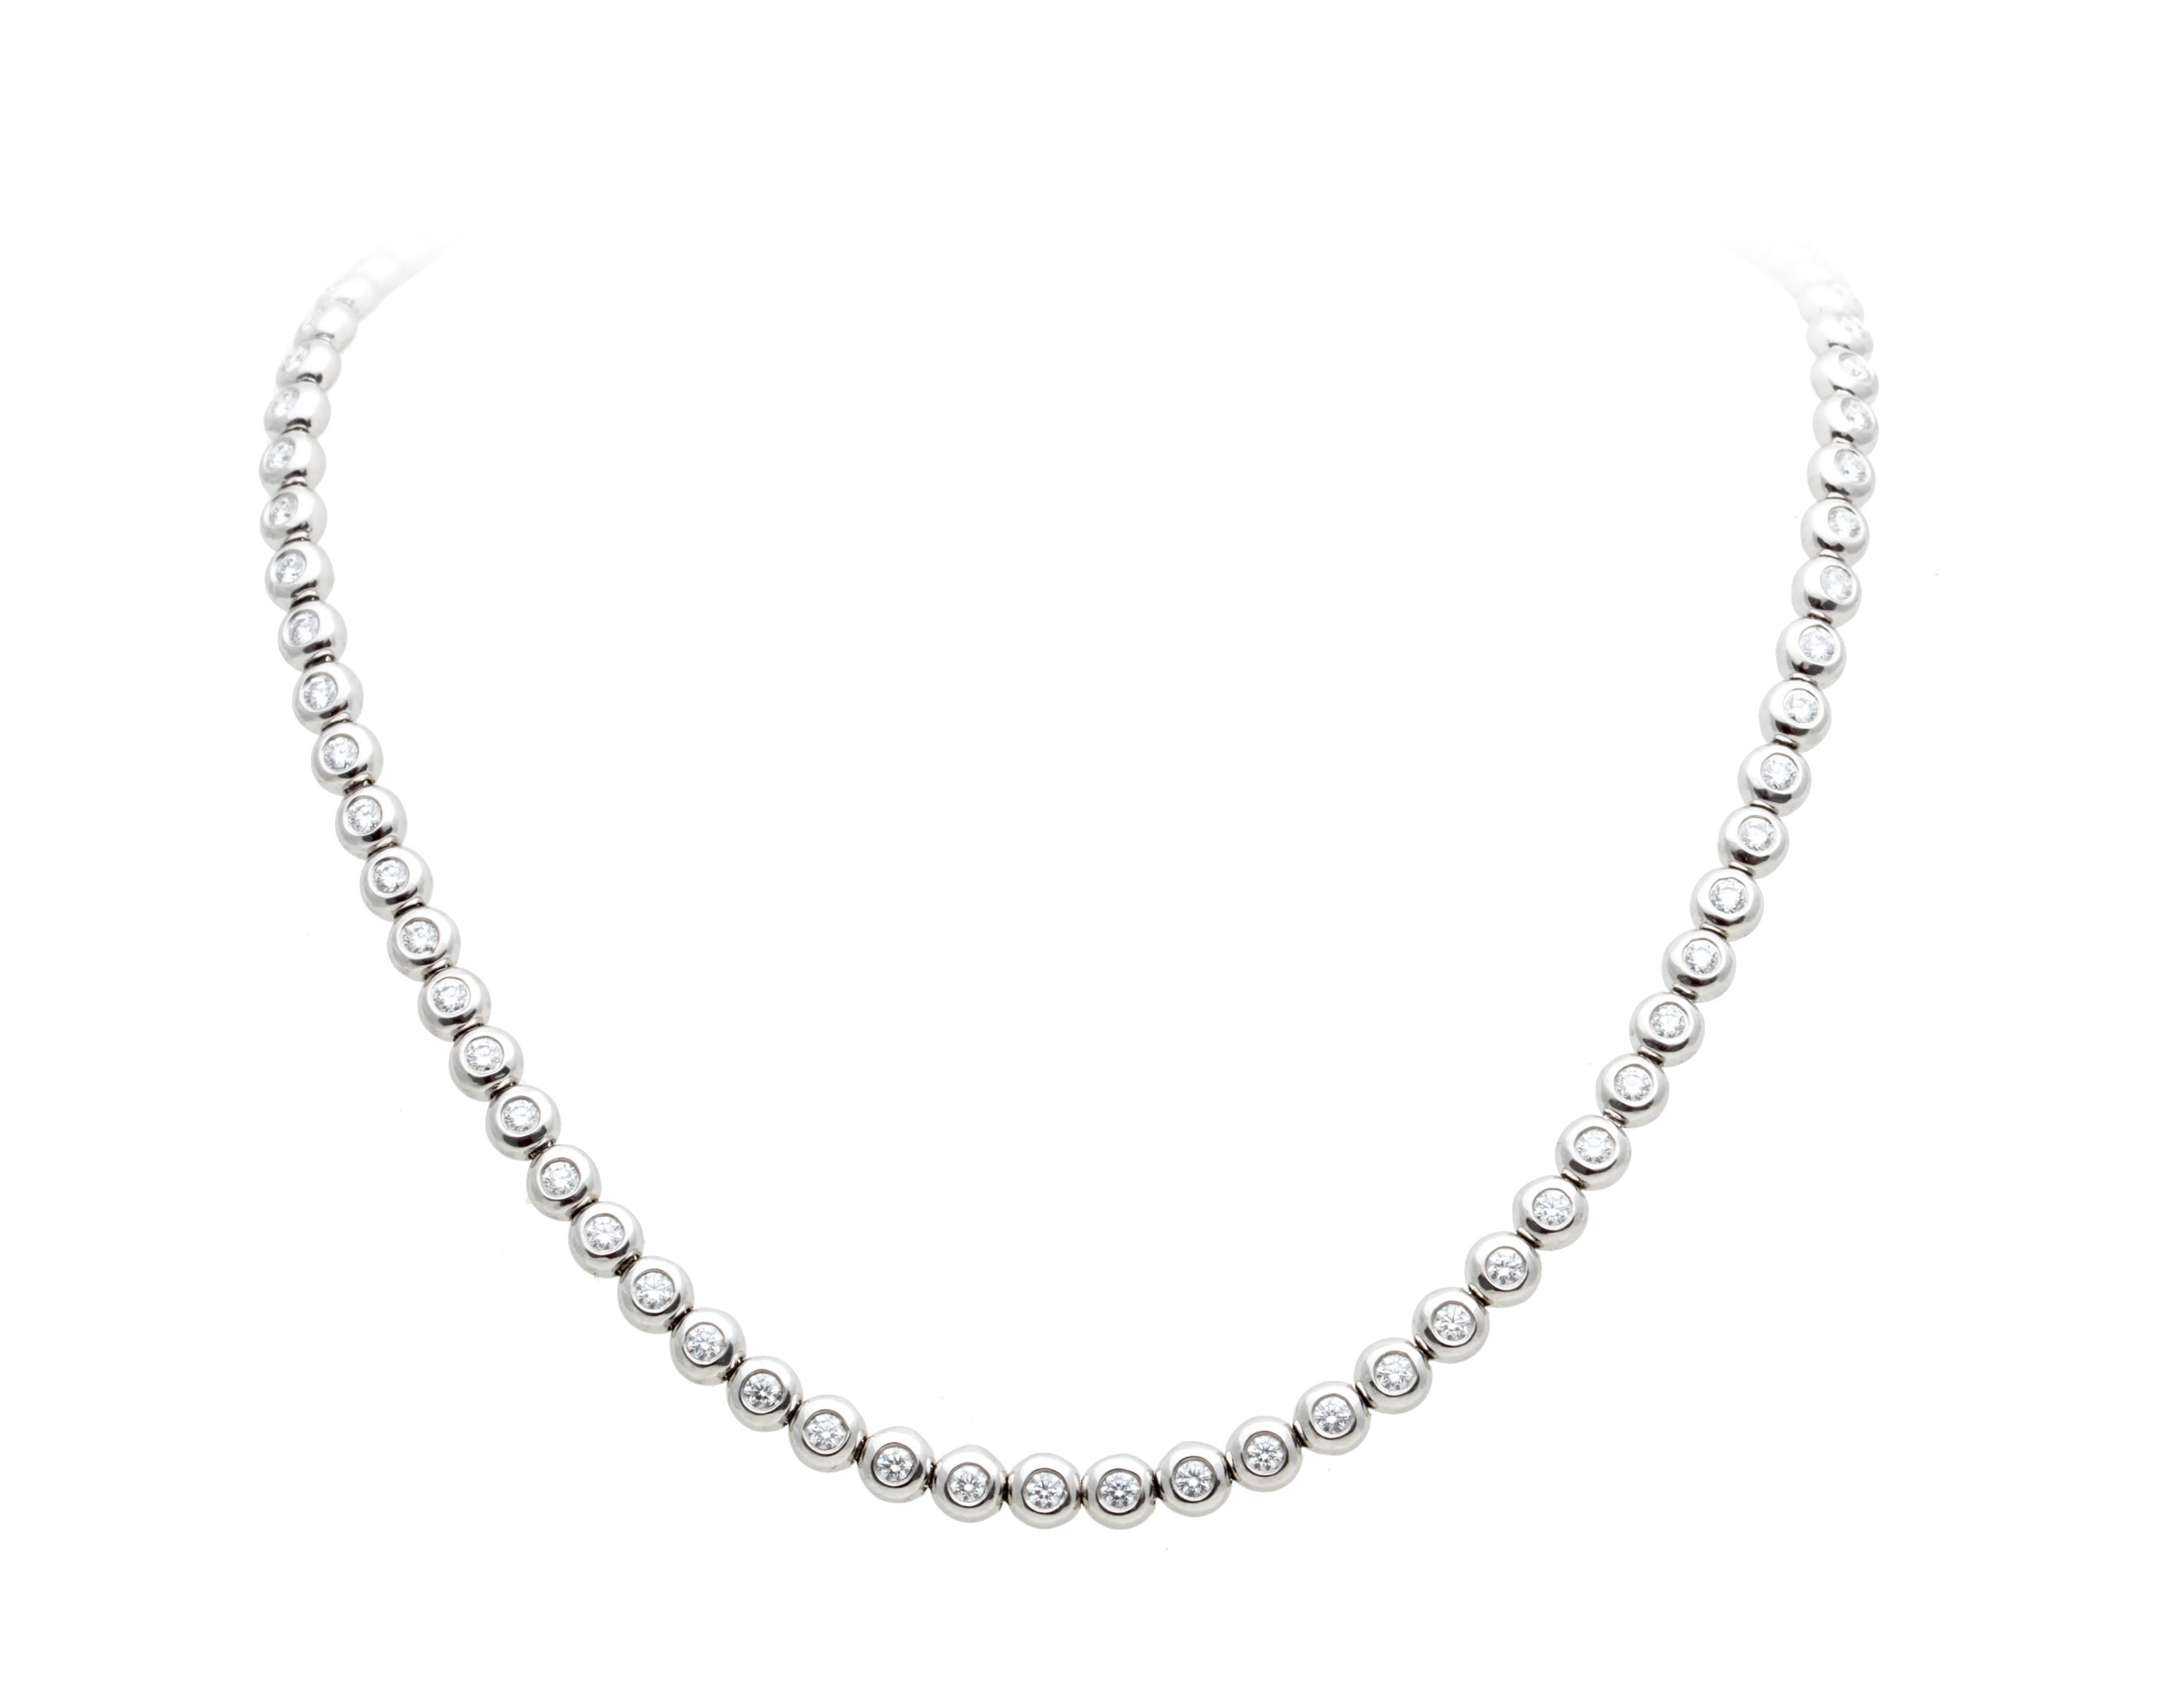 Tiffany & Co. Diamond Platinum Tennis Necklace In Excellent Condition For Sale In Sunny Isles Beach, FL